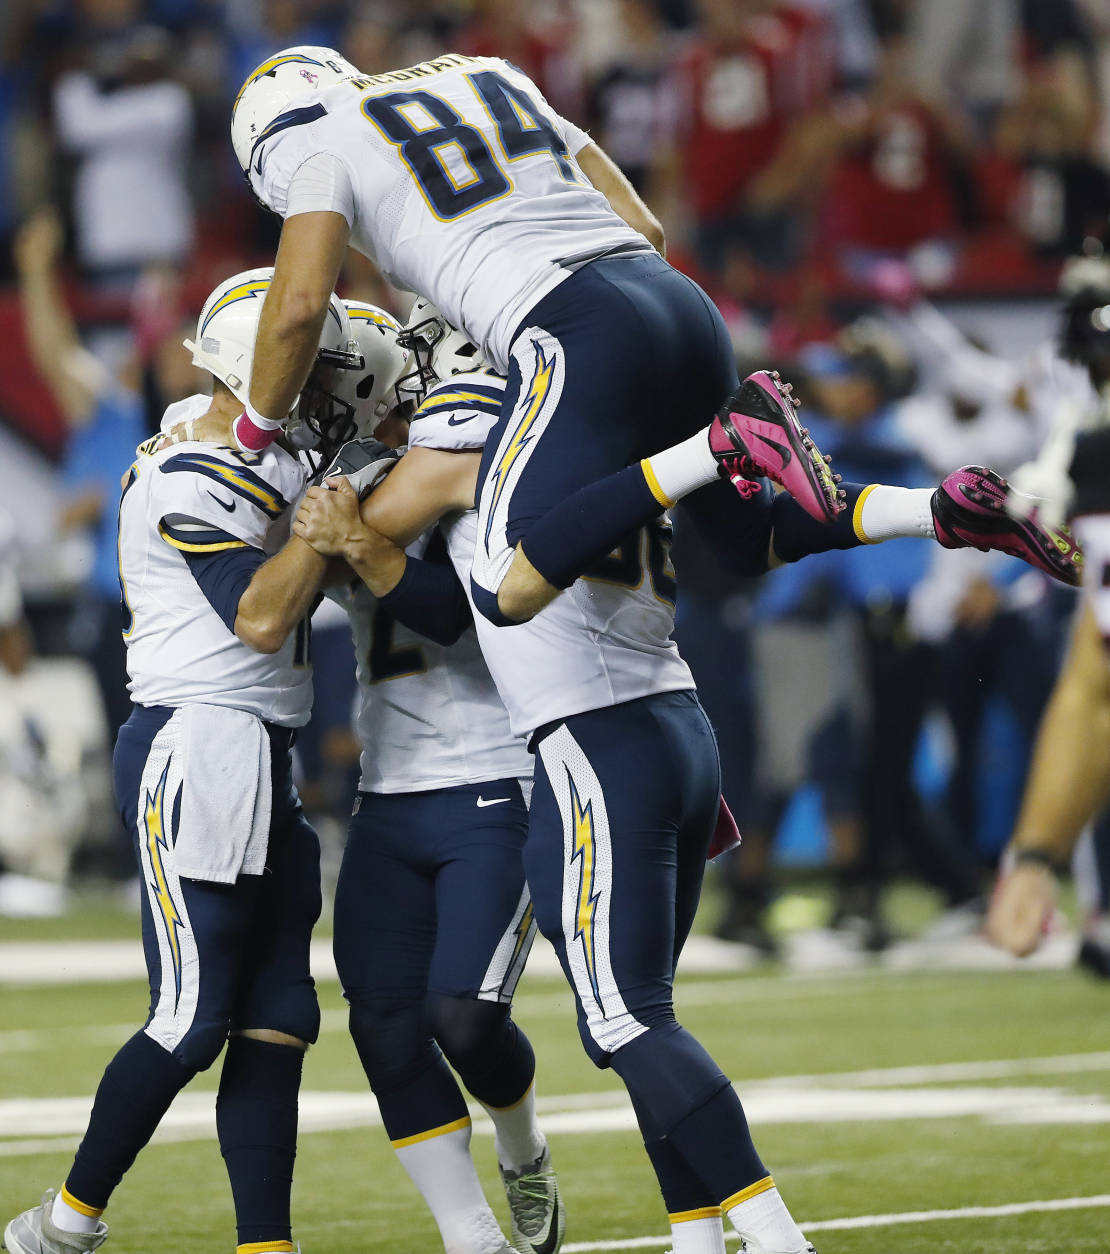 San Diego Chargers tight end Sean McGrath (84) jumps on San Diego Chargers kicker Josh Lambo (2) after Lambo kicked the game winning field goal in overtime of an NFL football game against the Atlanta Falcons, Sunday, Oct. 23, 2016, in Atlanta. The Chargers won 33-30. (AP Photo/John Bazemore)